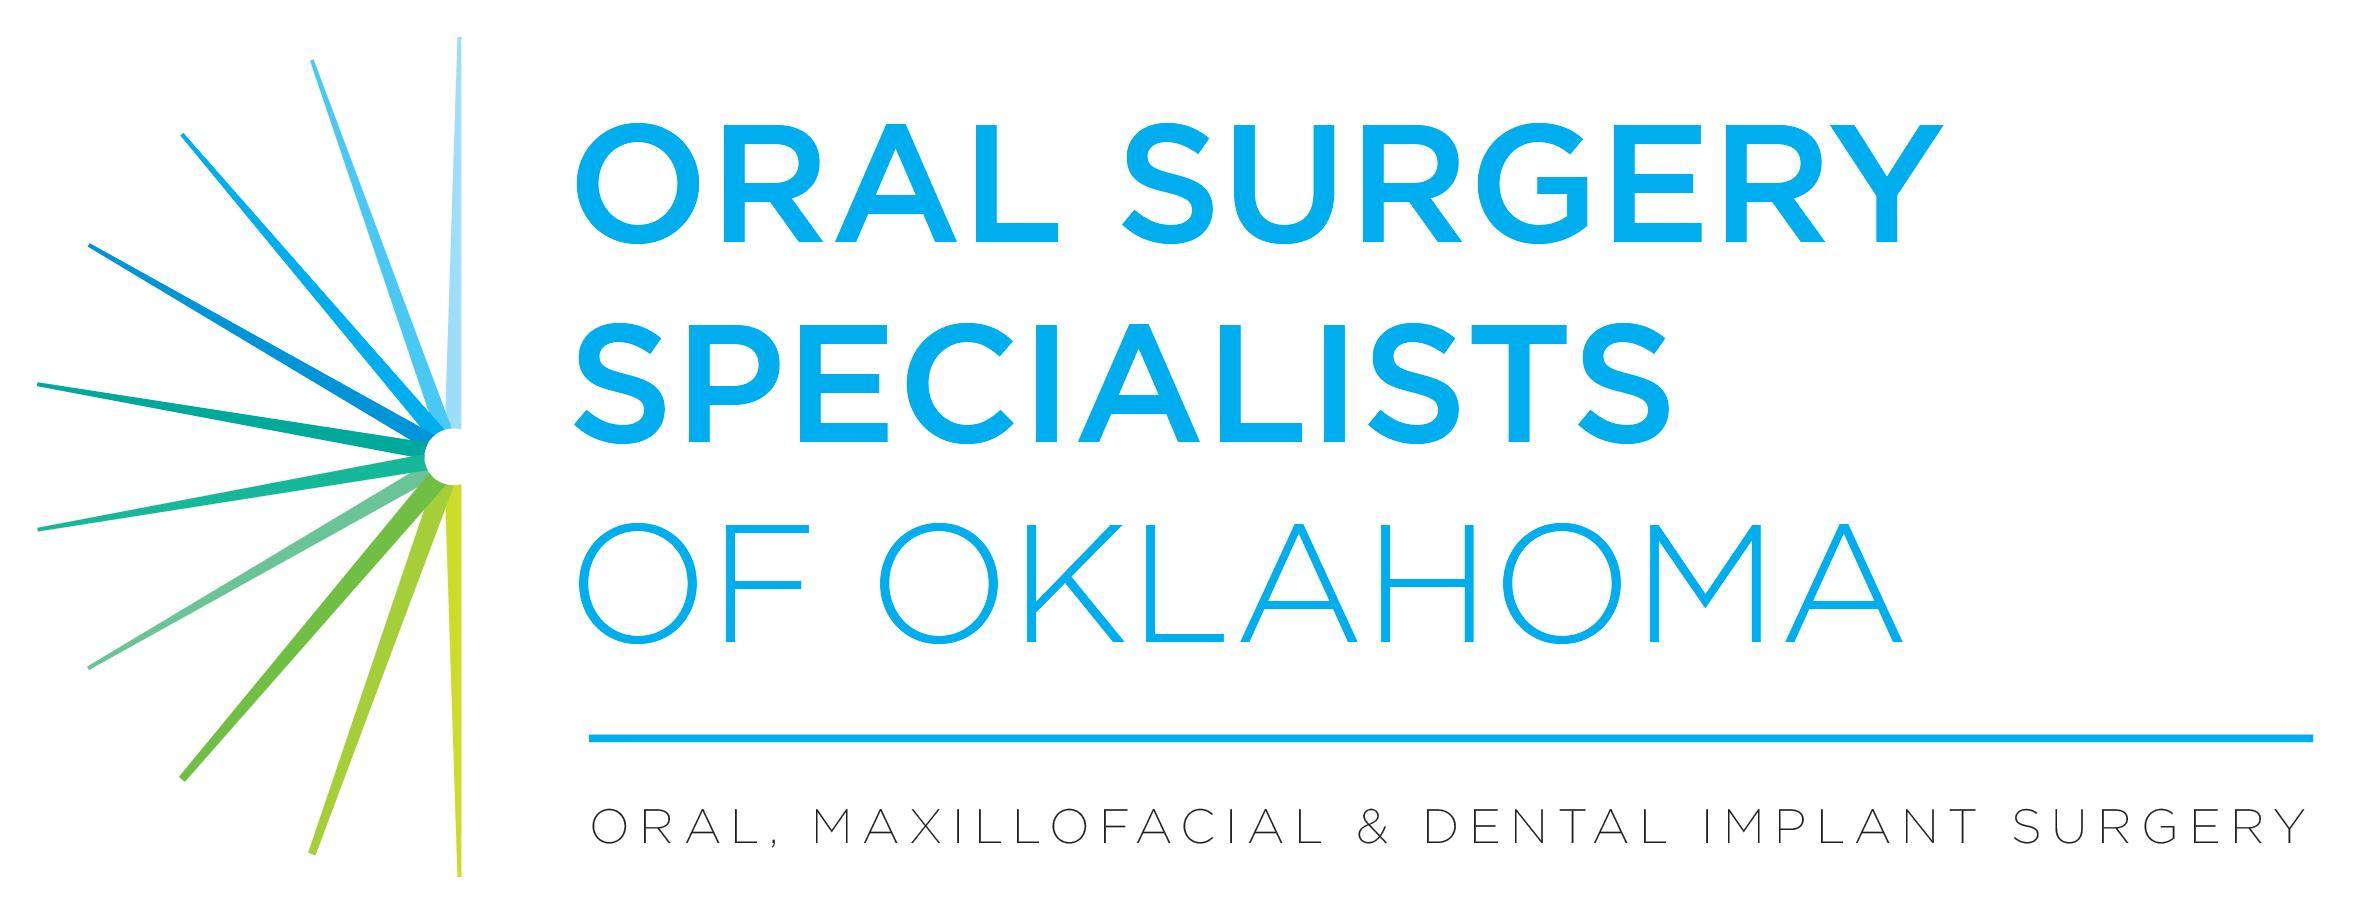 Oral Surgery Specialists of Oklahoma Photo